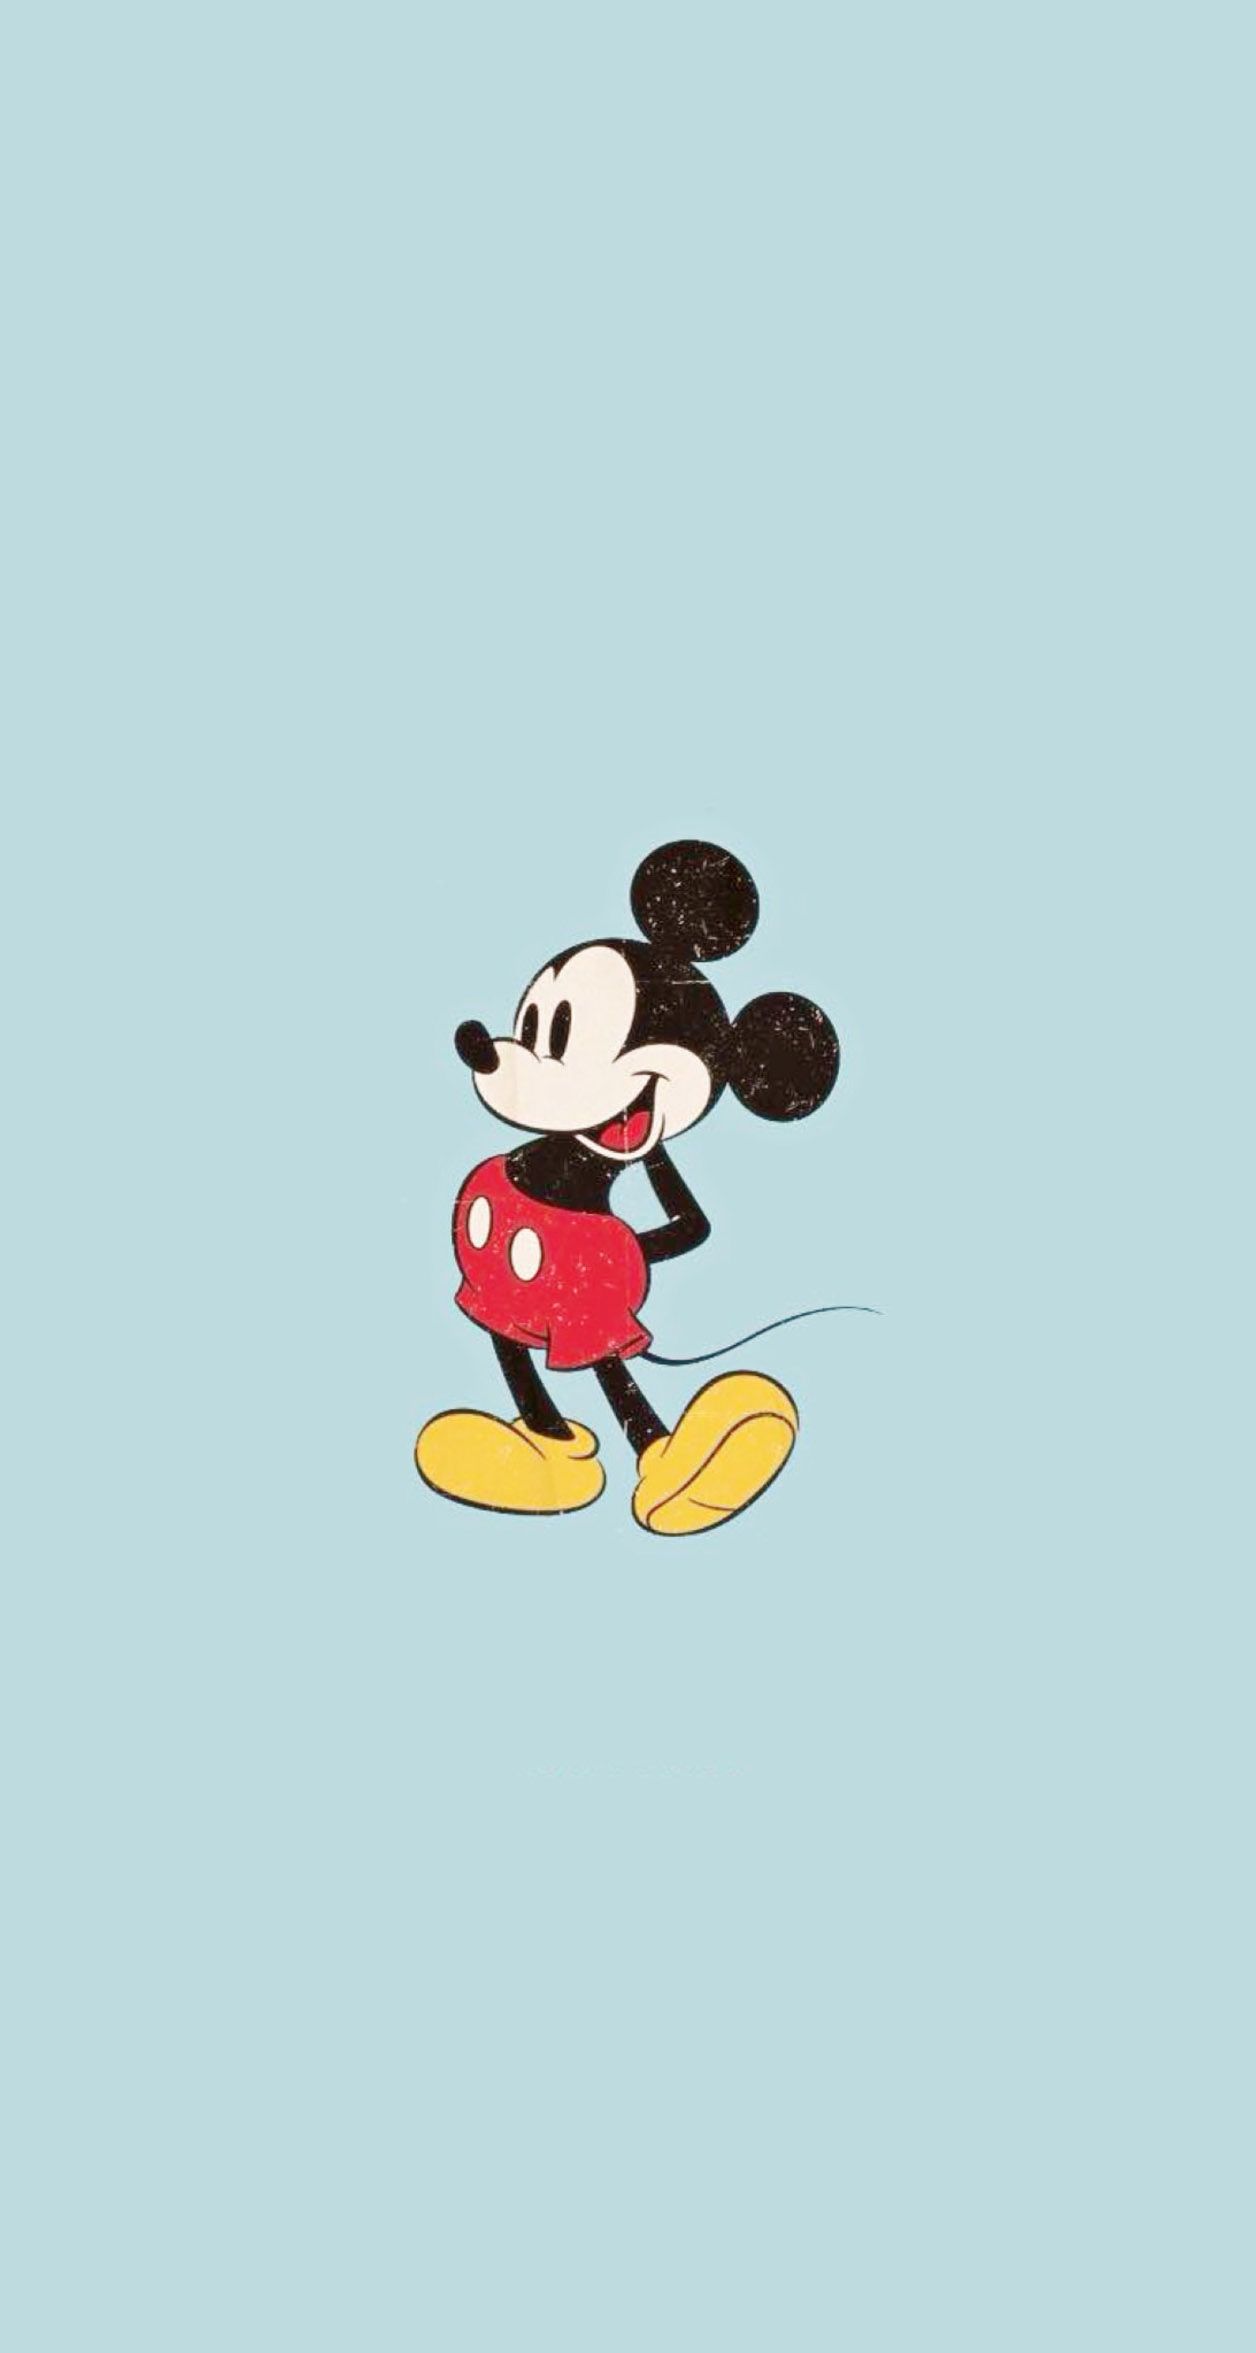 Mickey Mouse Wallpapers iPhone  Wallpaper Cave  Sfondi per iphone Sfondi  iphone Sfondi gratis